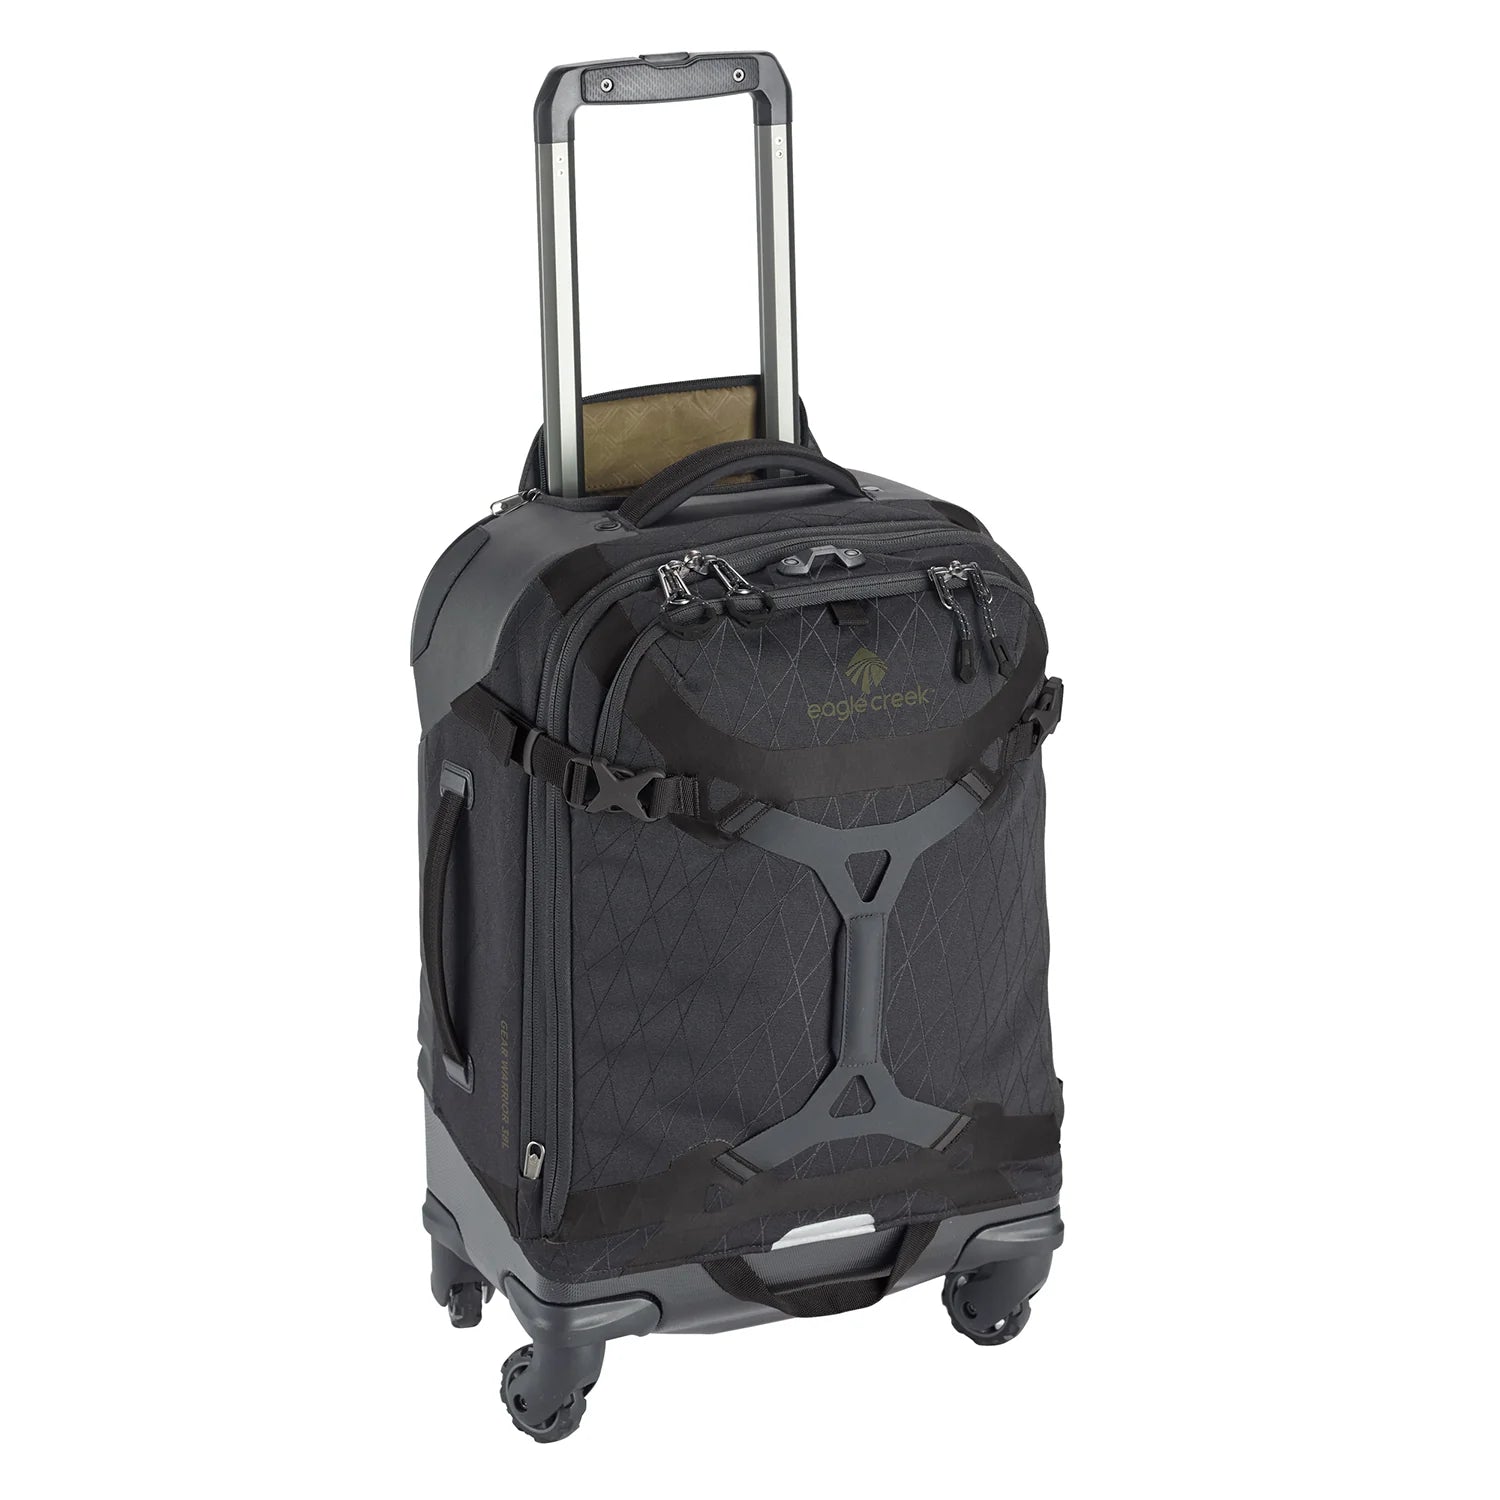 GEAR WARRIOR 4 WHEELED 21.75" CARRY ON LUGGAGE